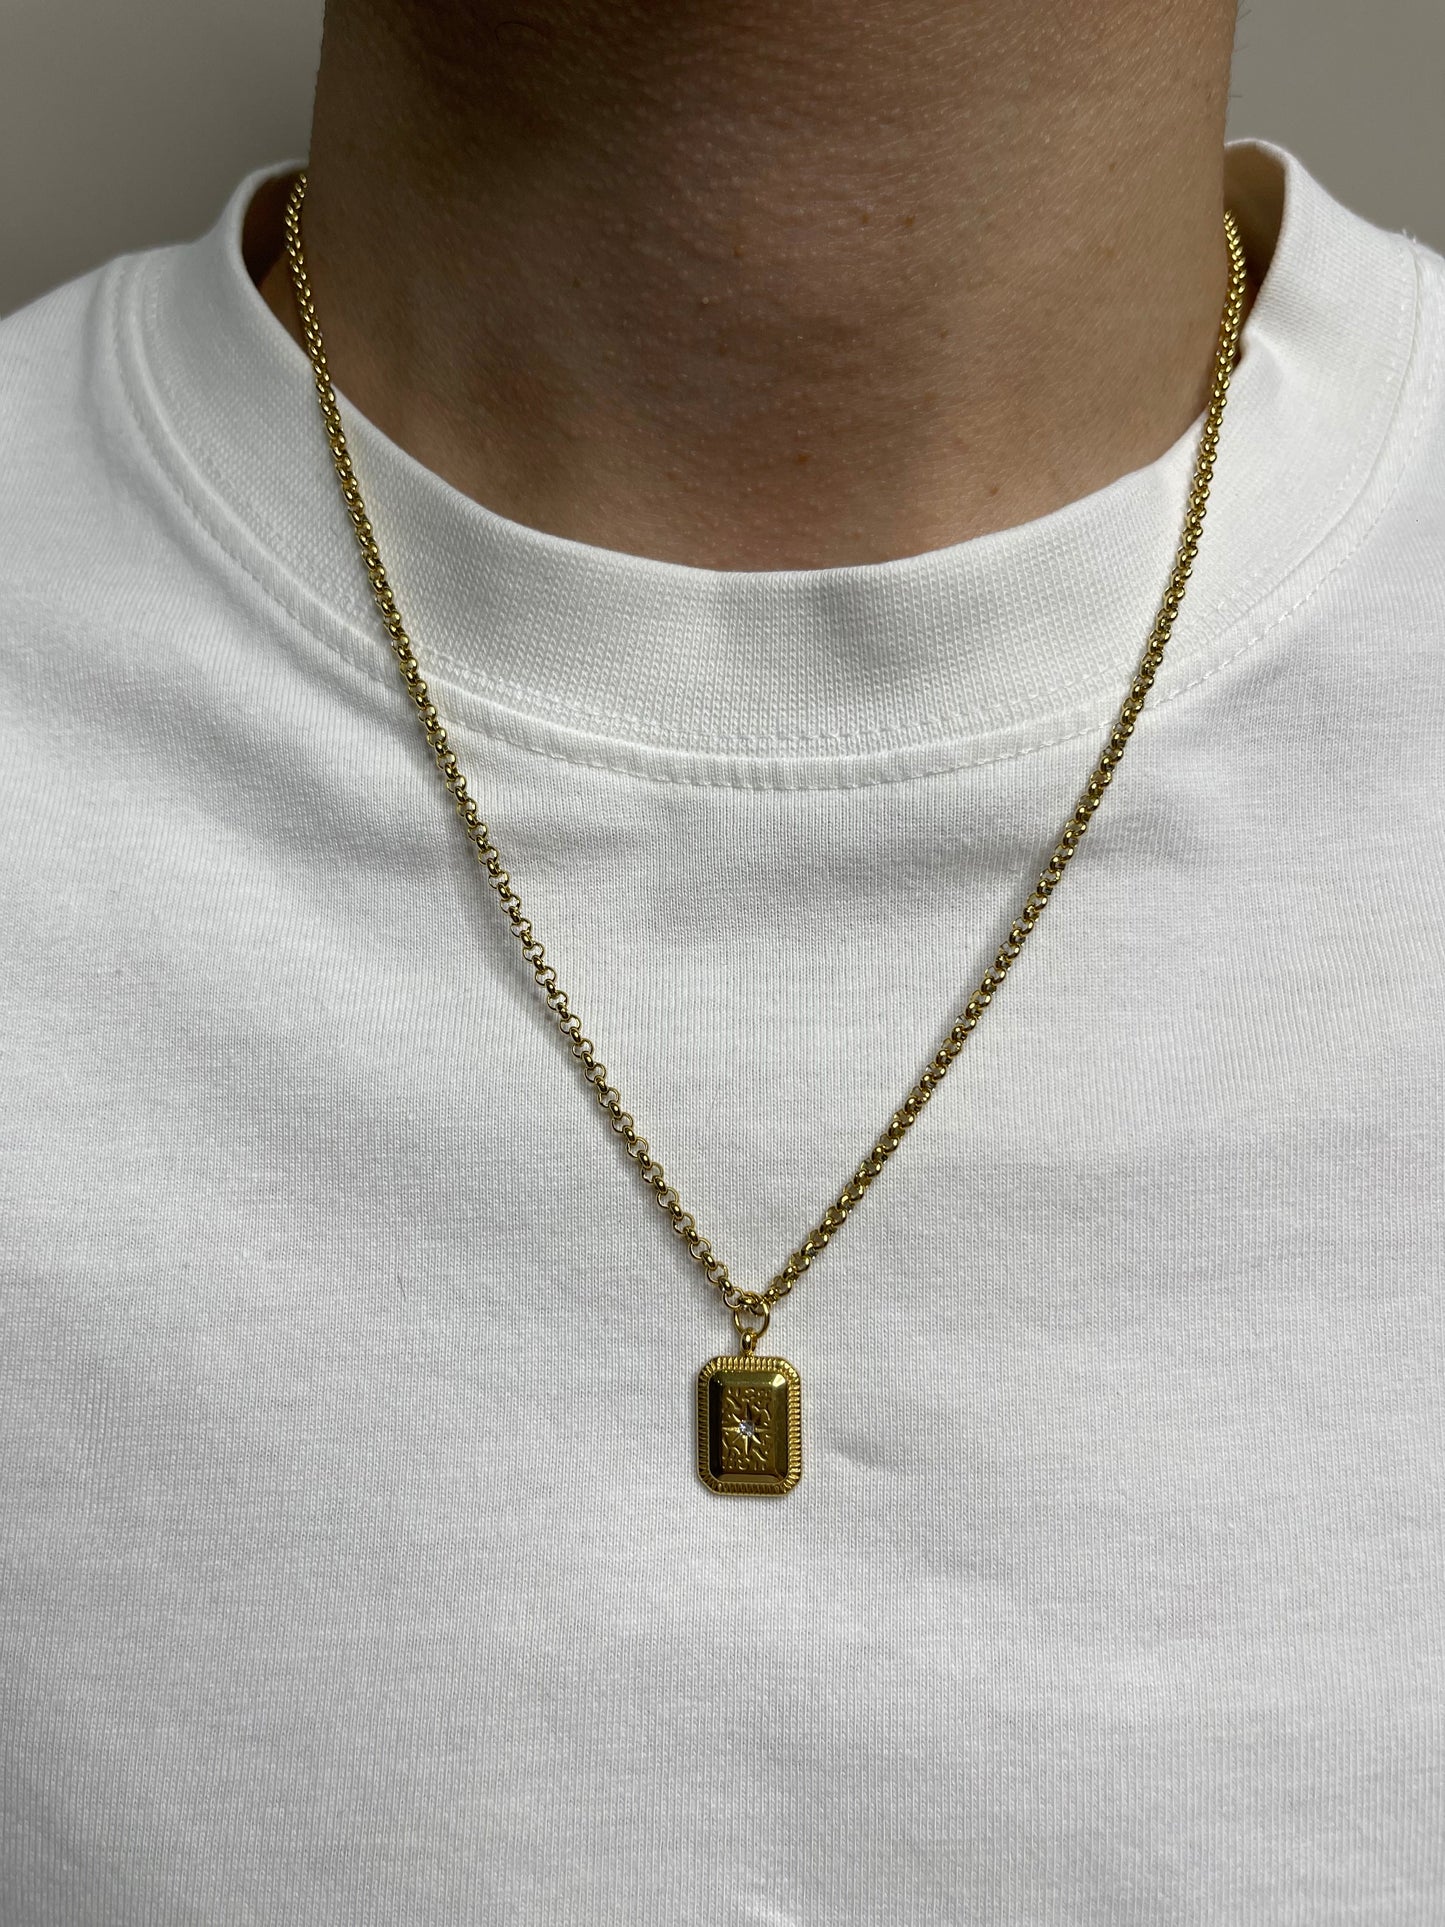 "OASIS" PENDANT NECKLACE | GOLD / SILVER